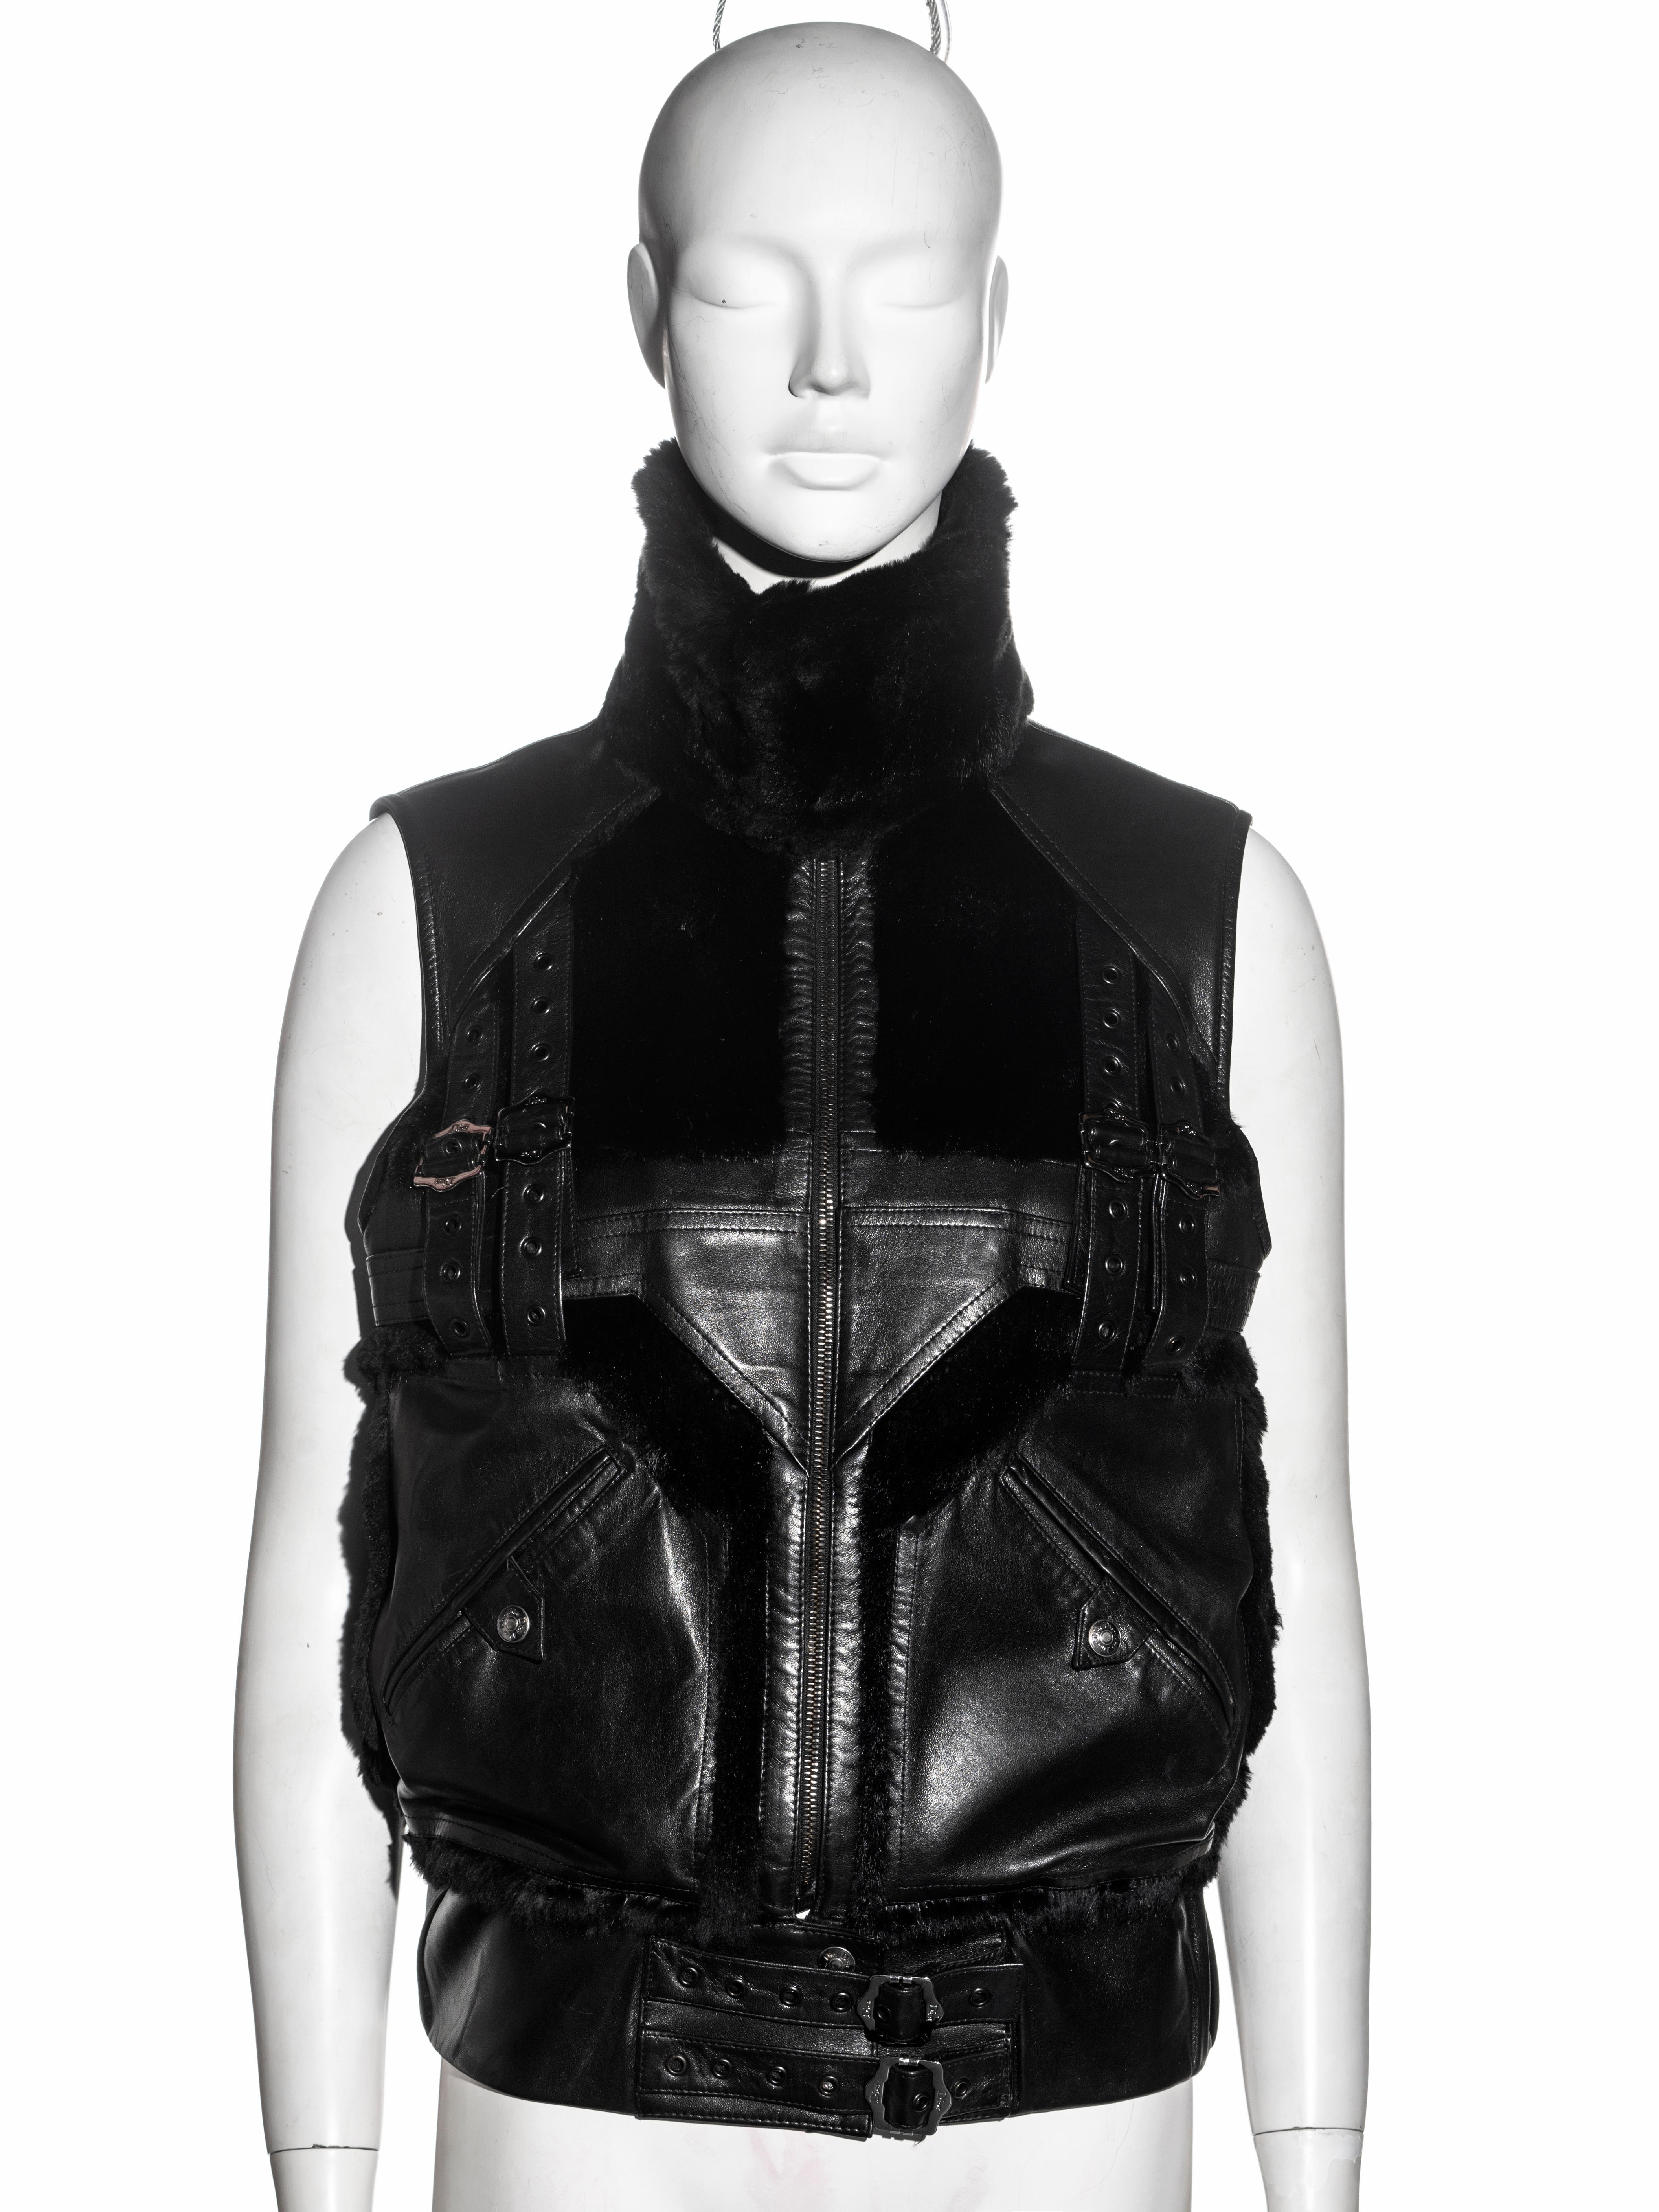 ▪ Christian Dior gillet 
▪ Designed by John Galliano
▪ Black lambskin leather and rabbit fur 
▪ Bondage straps with metal grommets and buckles 
▪ FR 36 - UK 8 - US 4
▪ Fall-Winter 2003
▪ Made in France